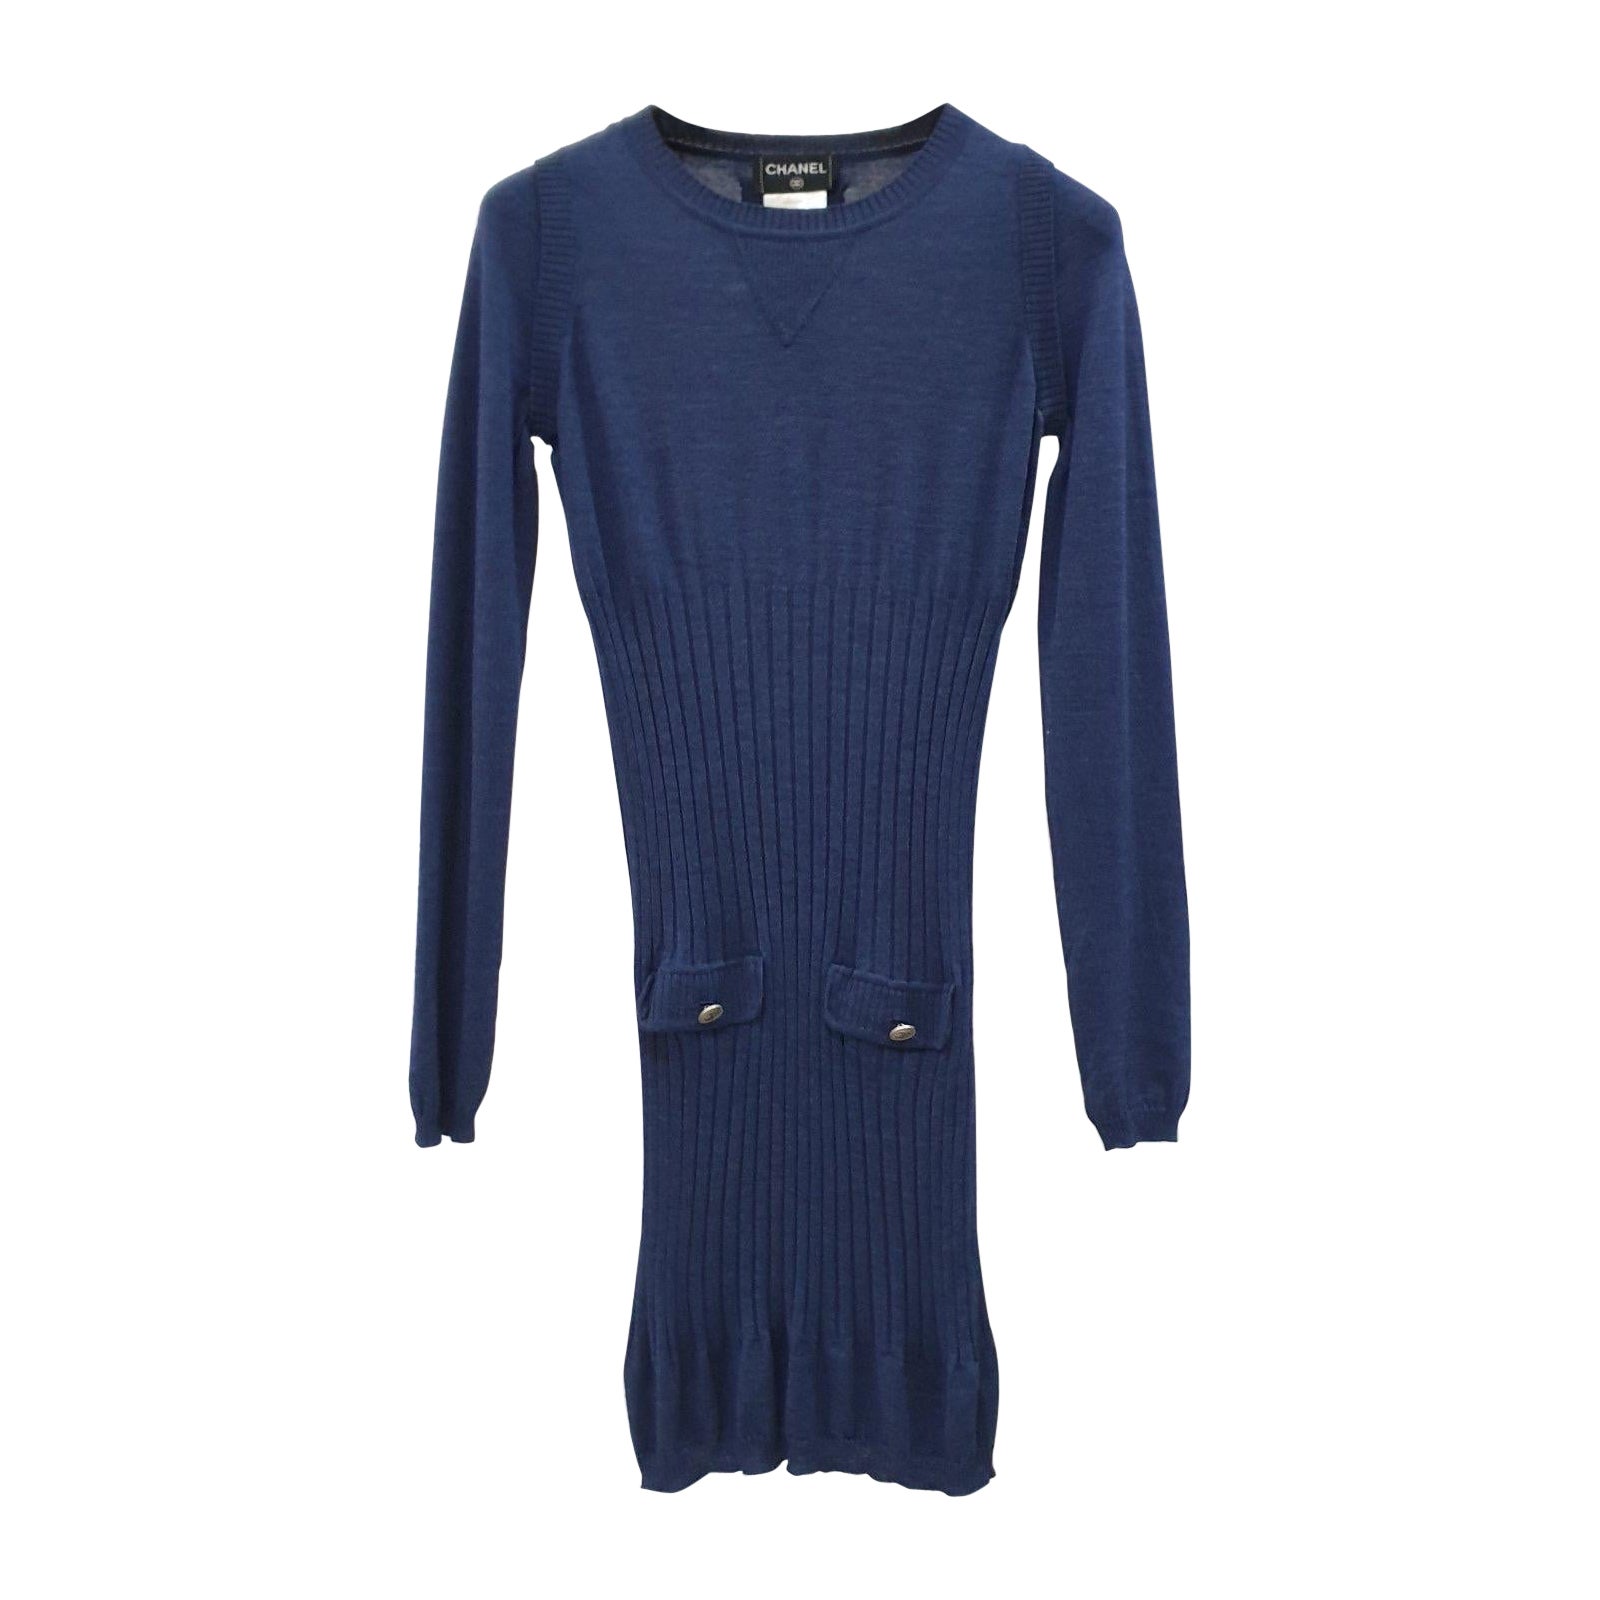 Chanel Navy Long Sleeve Knit Dress For Sale